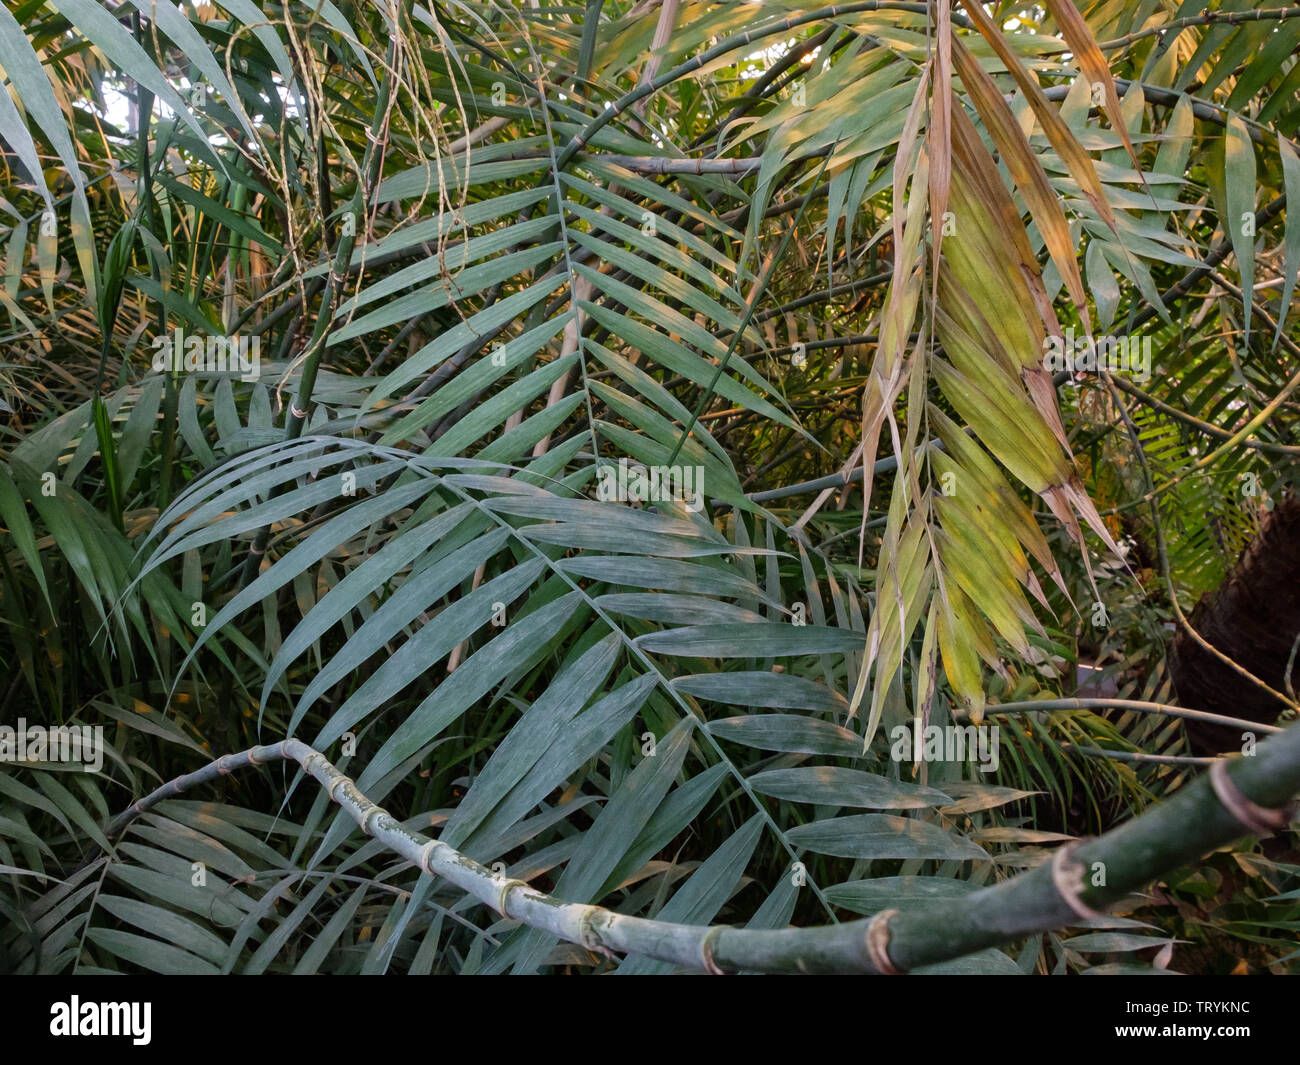 Jungle tropical forest umbrella palm tree leaves in the greenhouse. Stock Photo